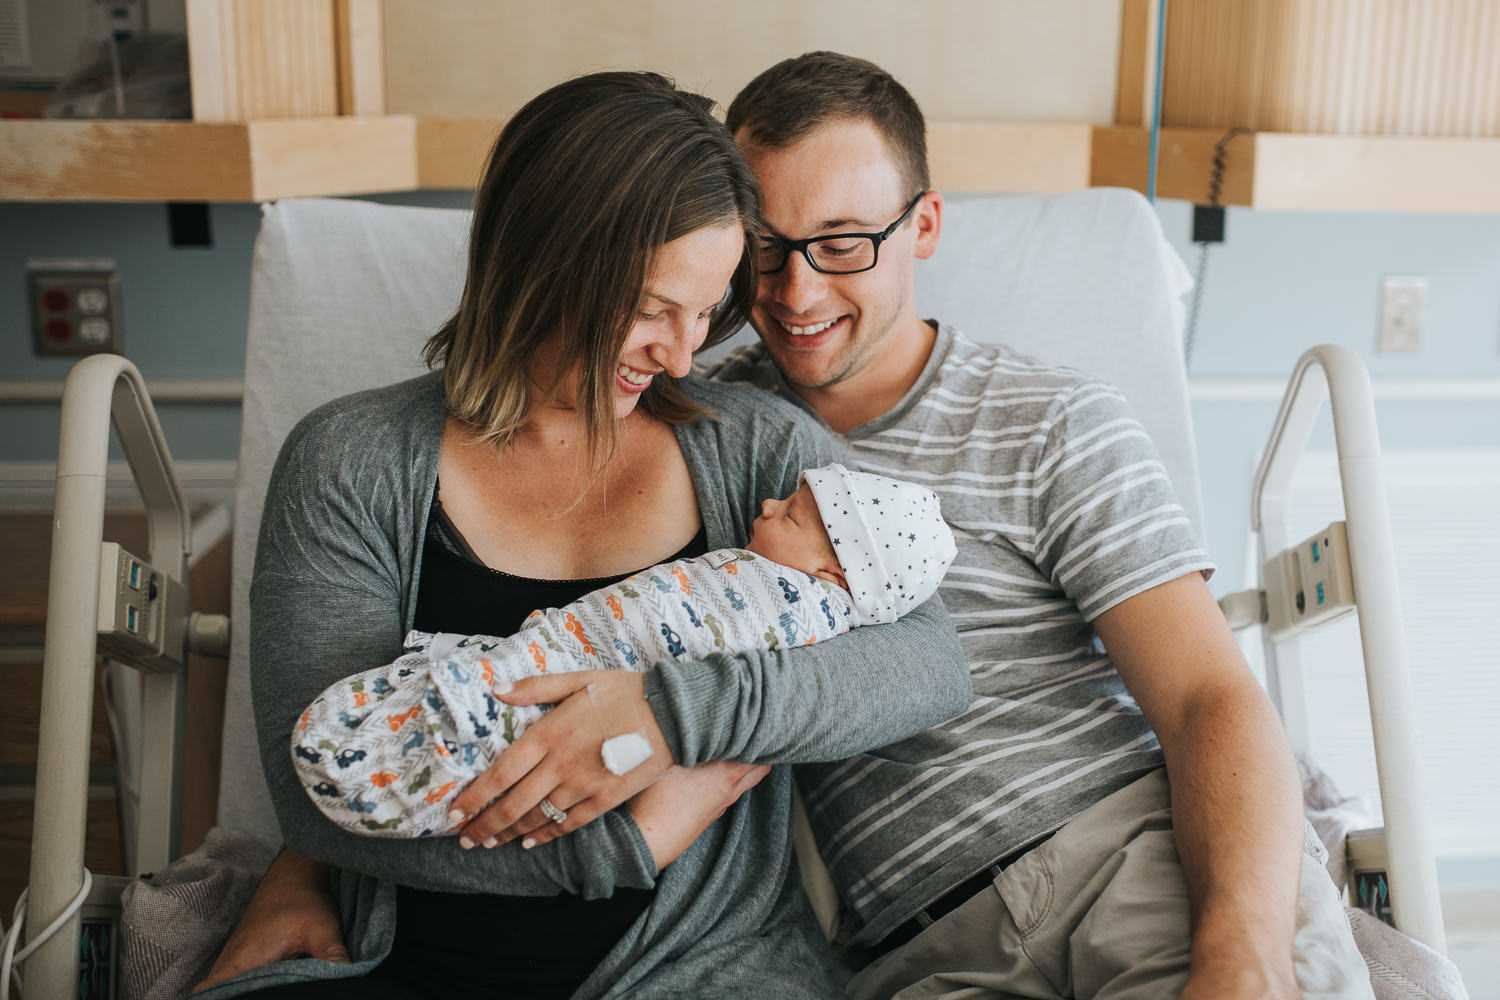 family of three sitting on hospital bed looking at newborn baby boy - Newmarket Fresh 48 photography